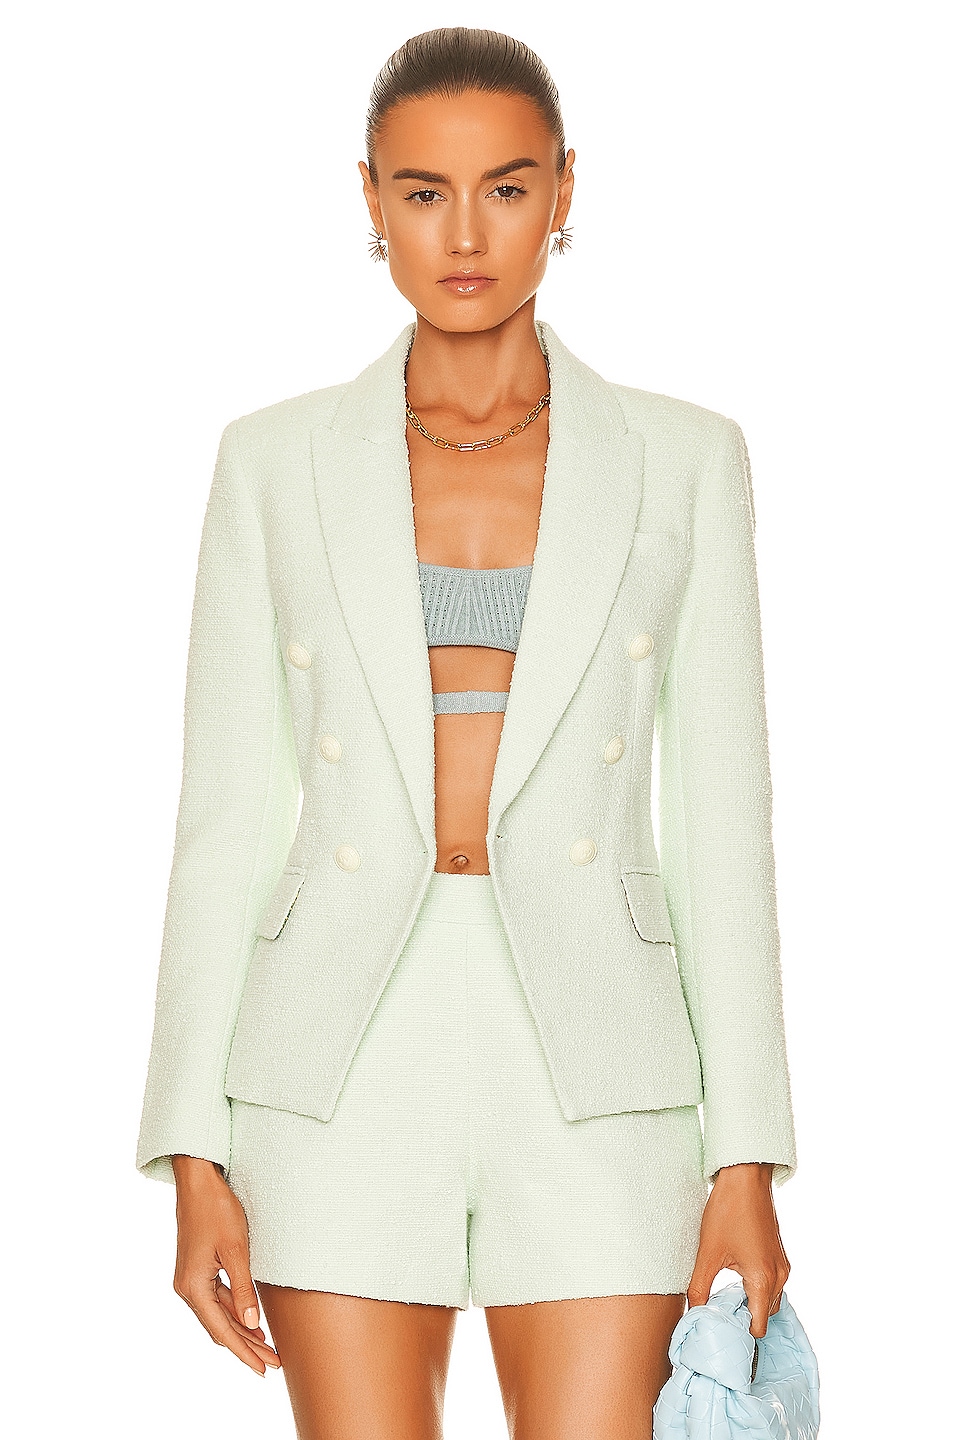 L'AGENCE Kenzie Double Breasted Blazer in Soft Mint | FWRD